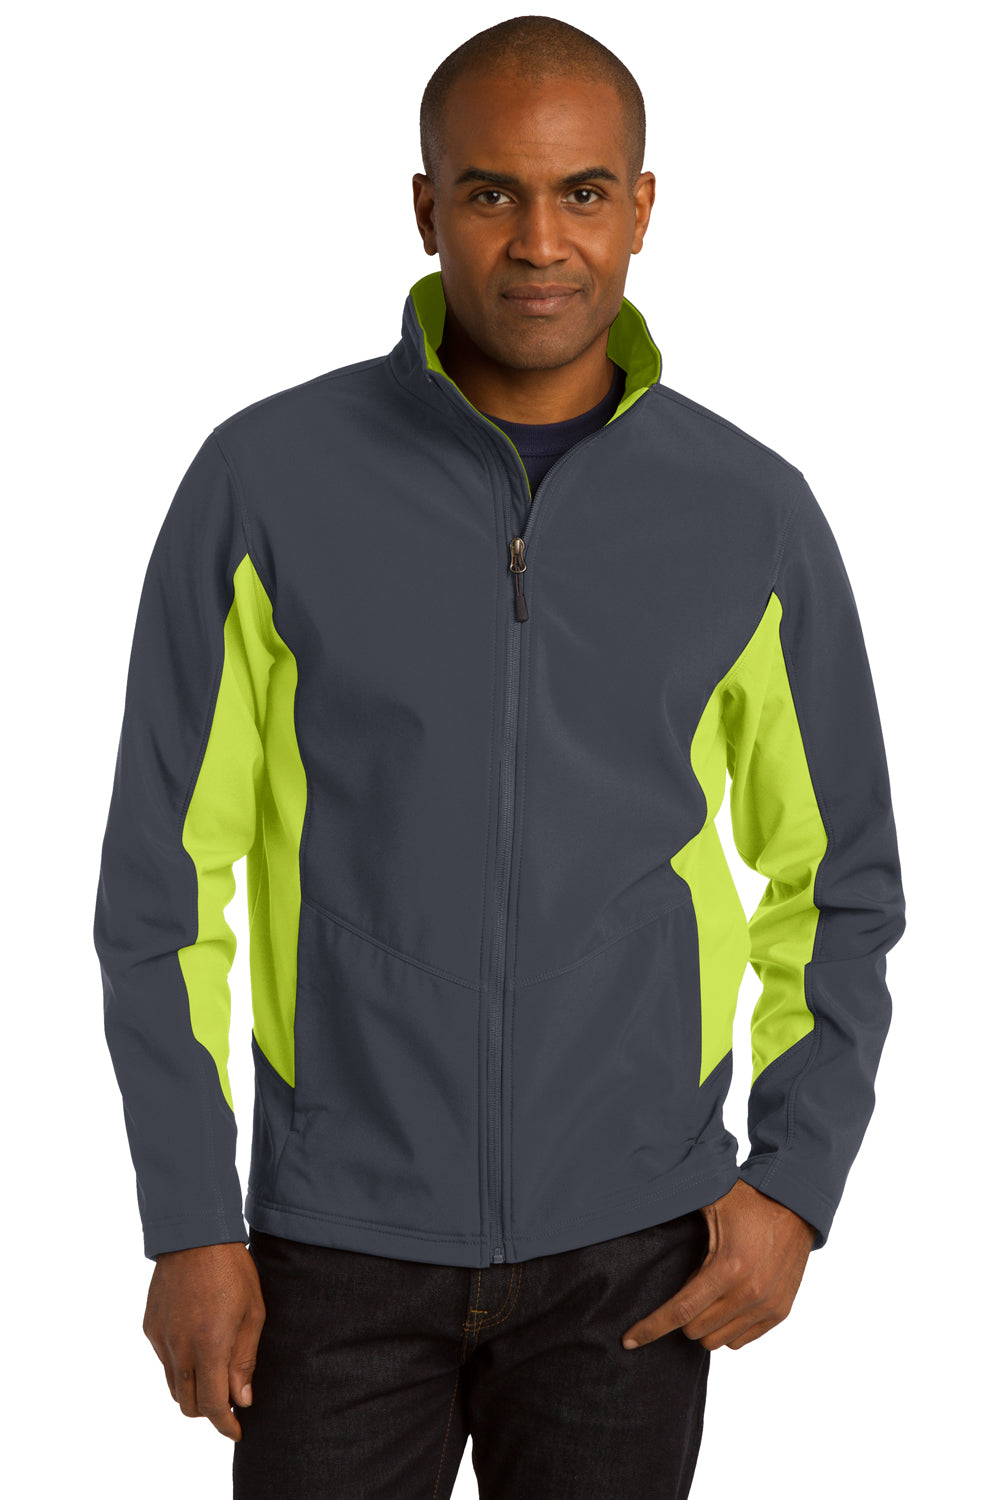 Port Authority J318 Mens Core Wind & Water Resistant Full Zip Jacket Grey/Charge Green Front